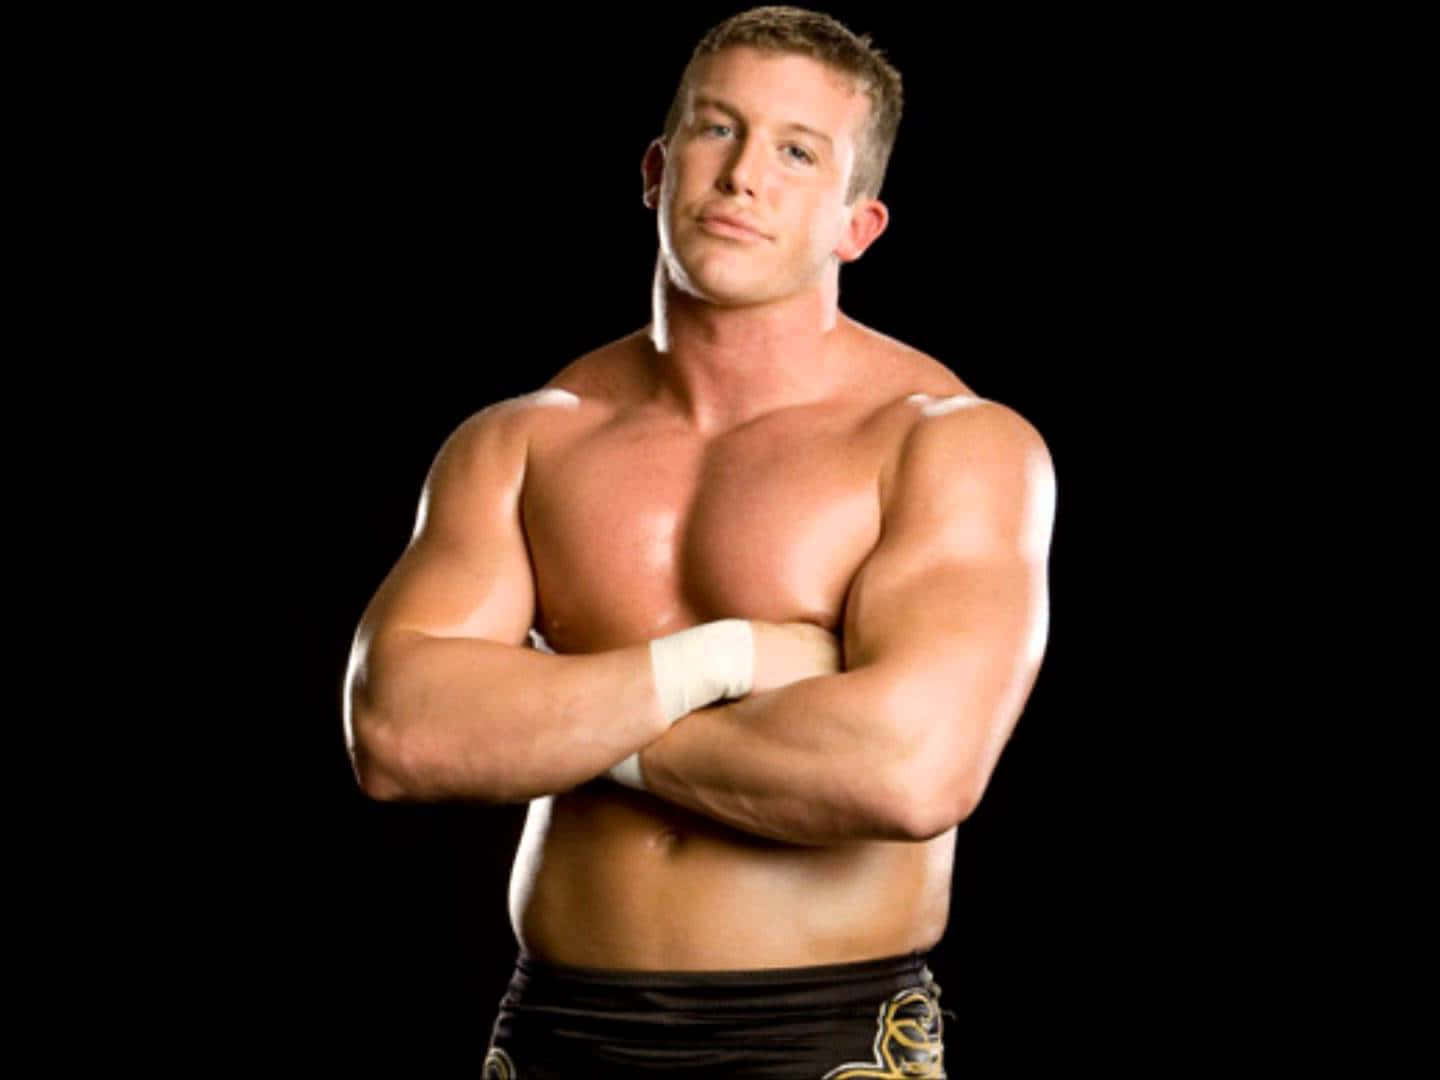 Wrestling Pro, Ted Dibiase Jr. in a Confident Stance Wallpaper